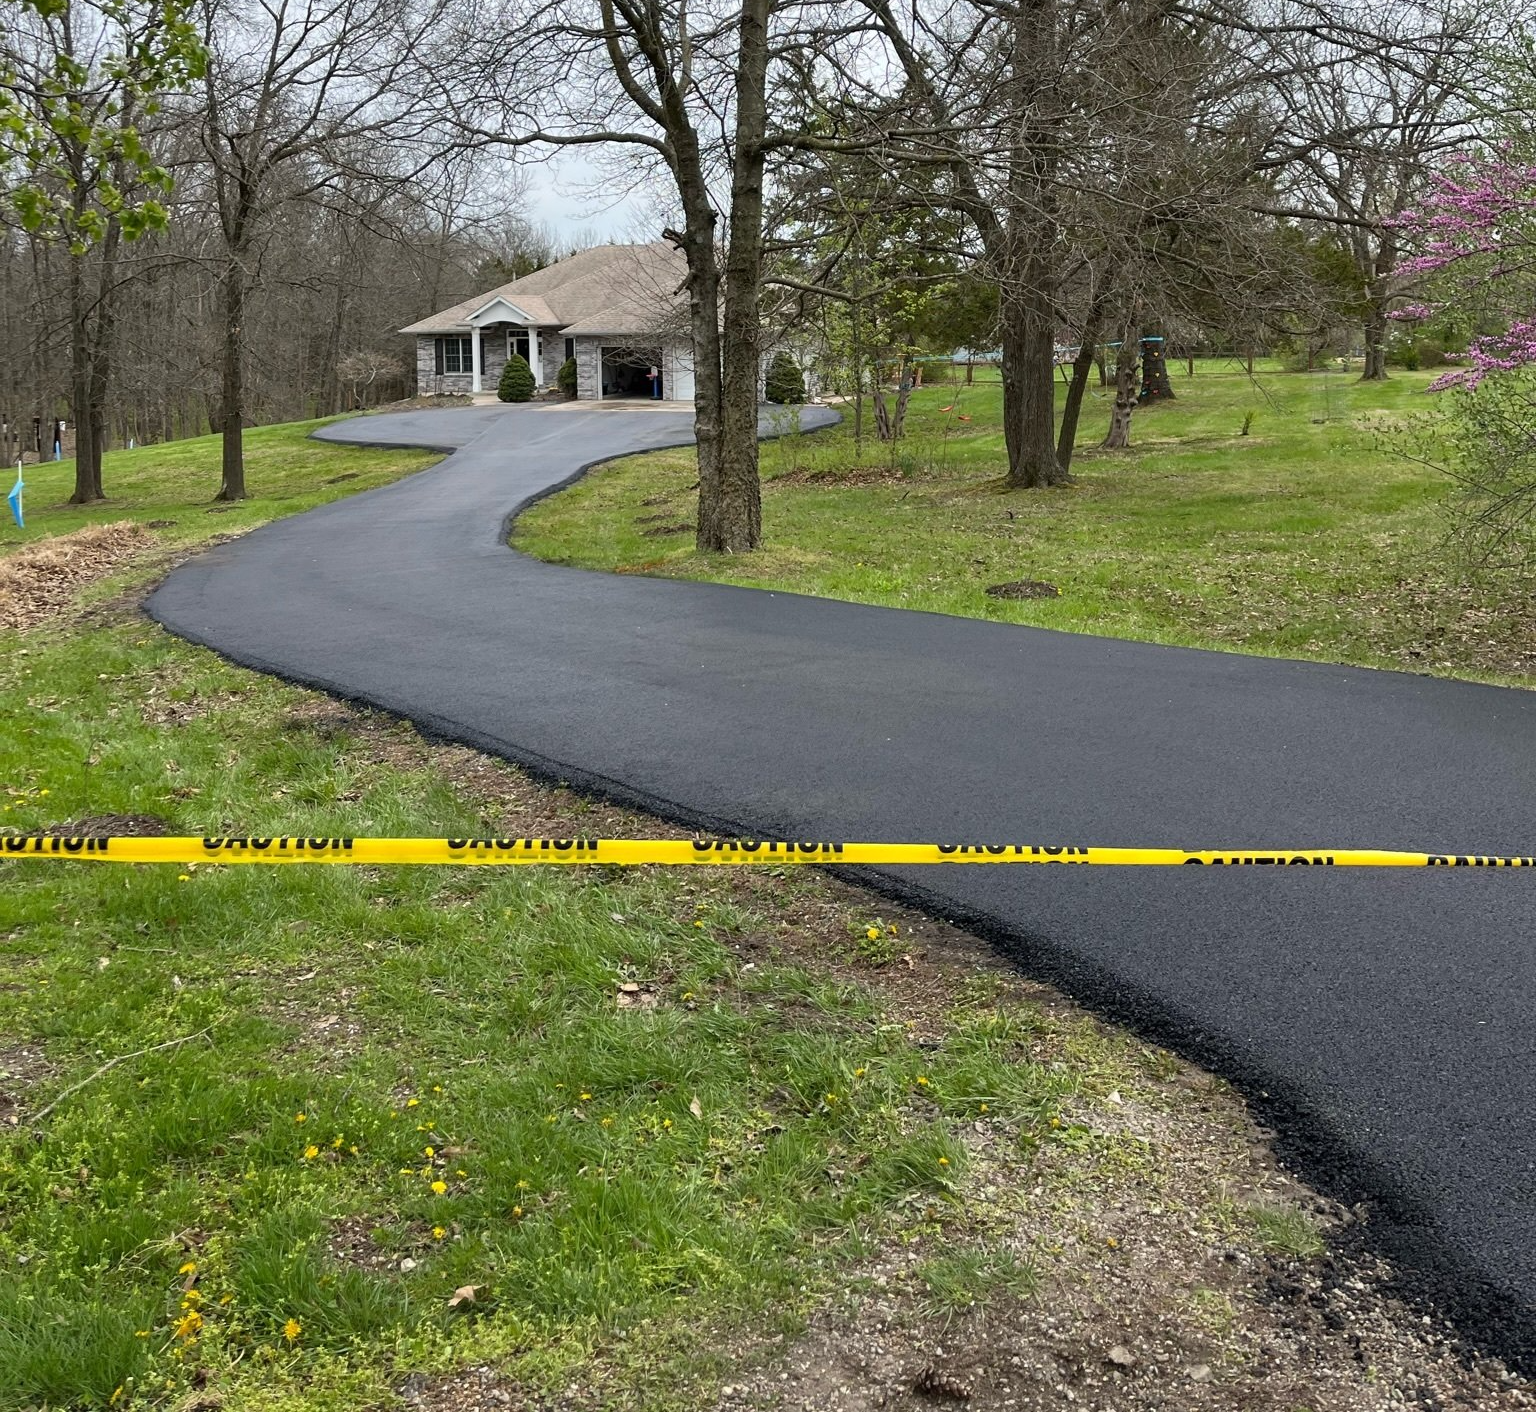 Don’t Let an Ugly Driveway Impact Your Columbia, MO Home’s Curb Appeal. Get Started With MoSEAL.